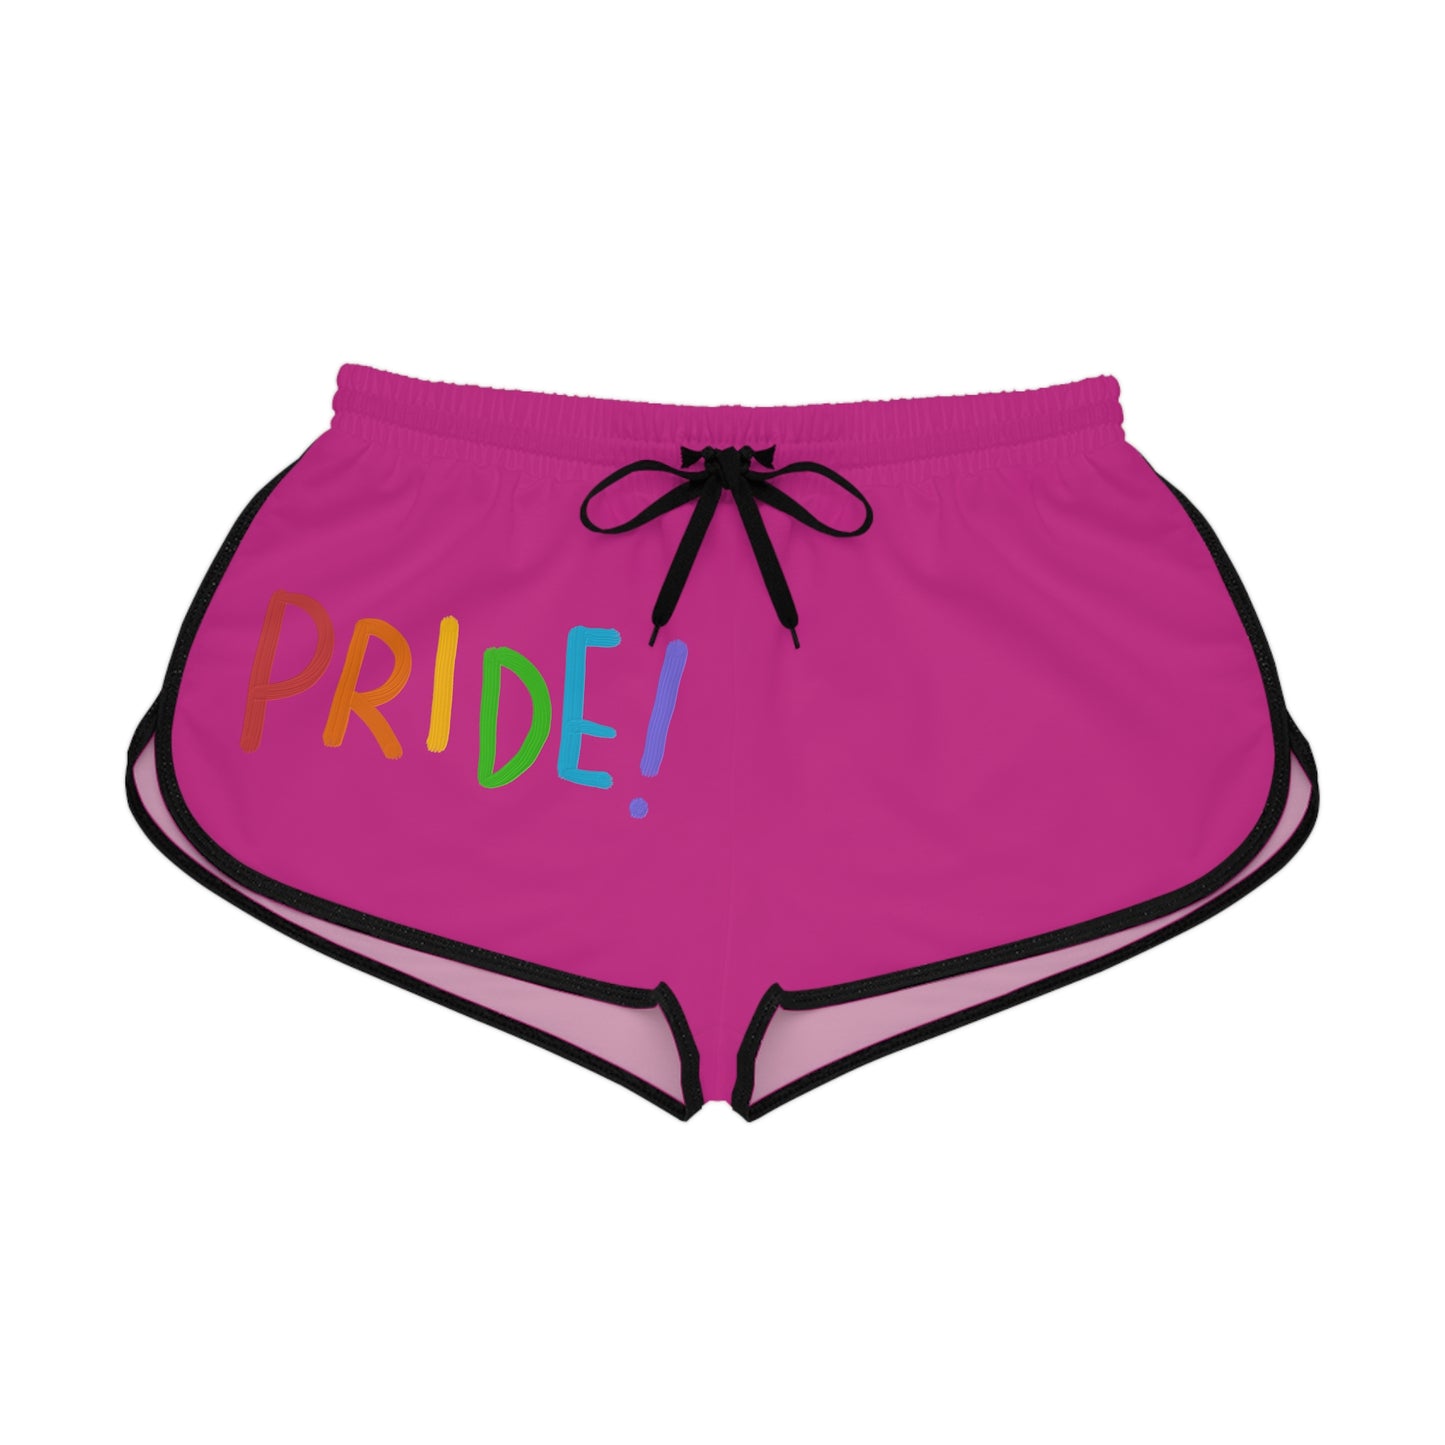 Women's Relaxed Shorts: LGBTQ Pride Pink